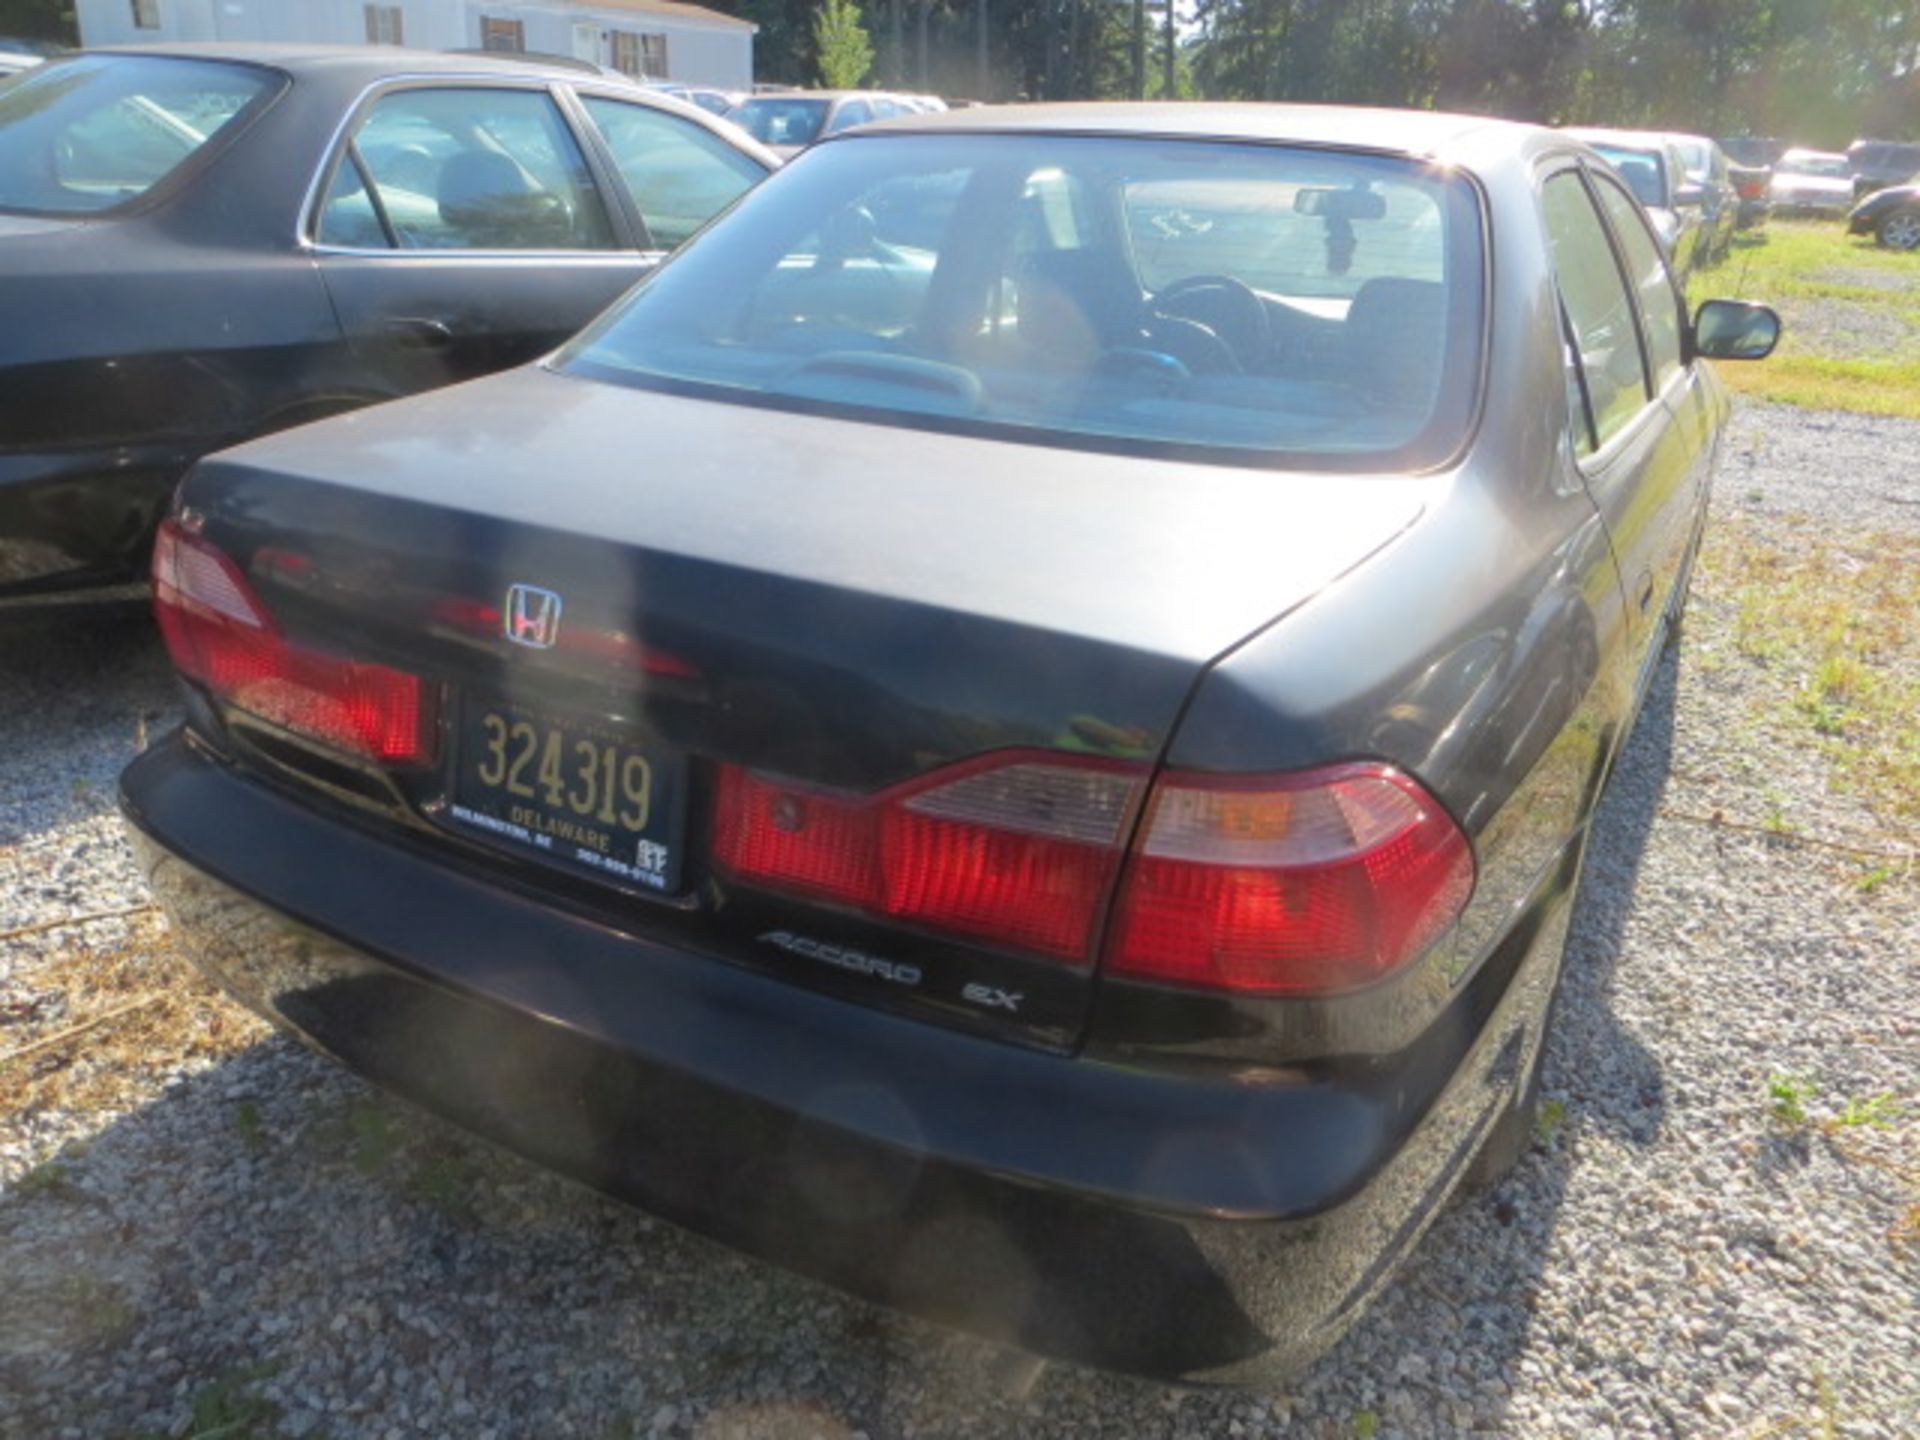 1998 Honda Accord EX 142000 MILES,VIN 1HGCG1650WA003017, SOLD WITH GOOD TRANSFERABLE TITLE - Image 3 of 3